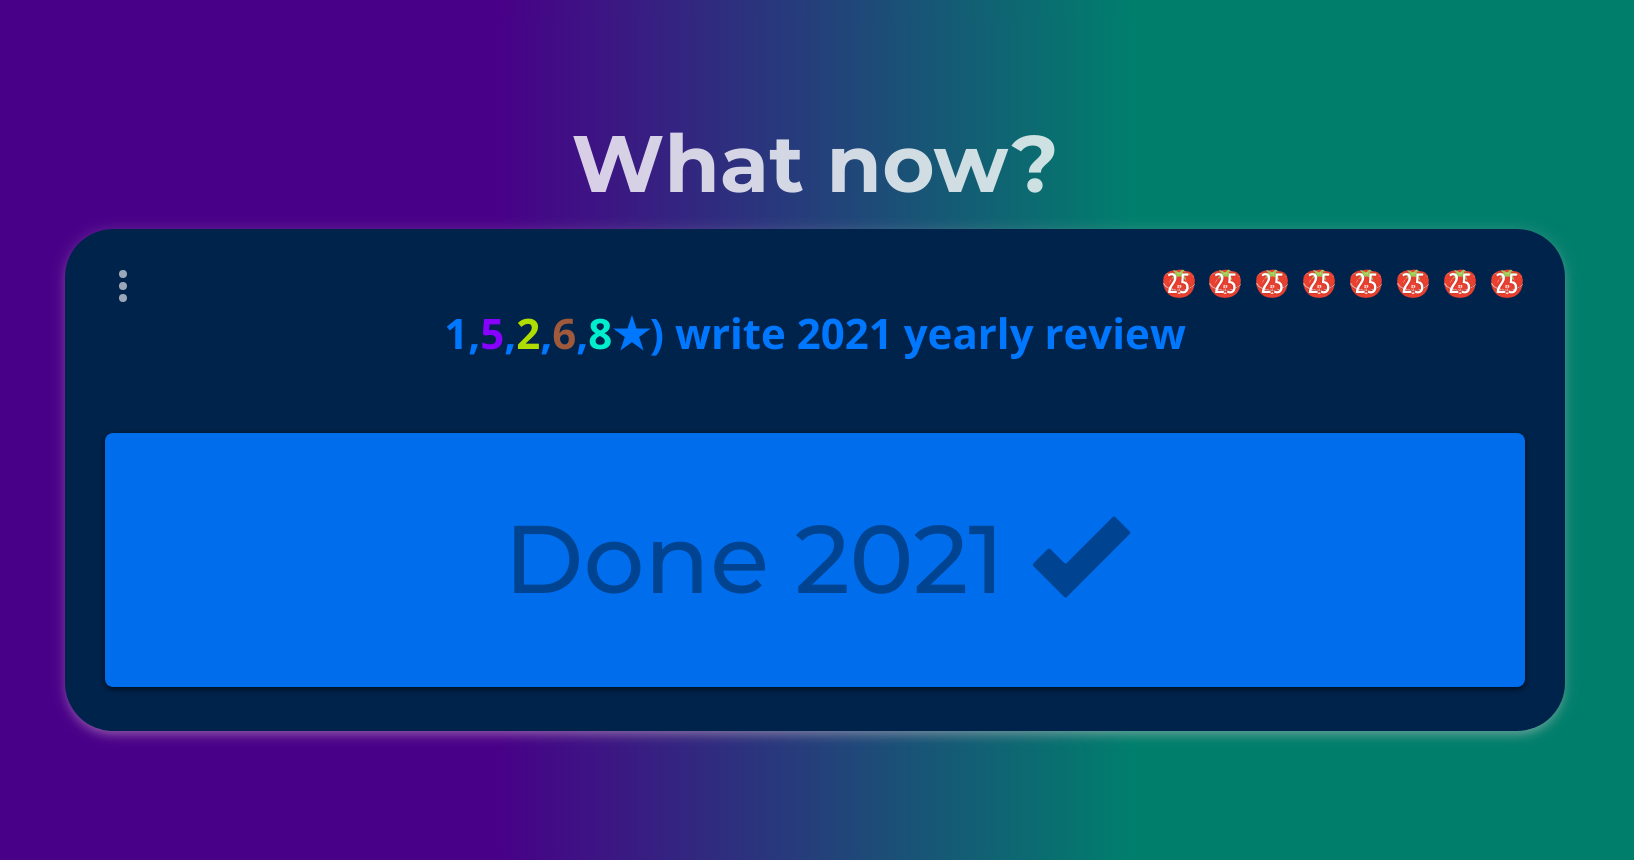 a screenshot of the Complice interface, showing a bit "What now?" question, underneath which is one intention to "write 2021 yearly review" and a giant Done button. there are 8 pomodoros shown towards the intention